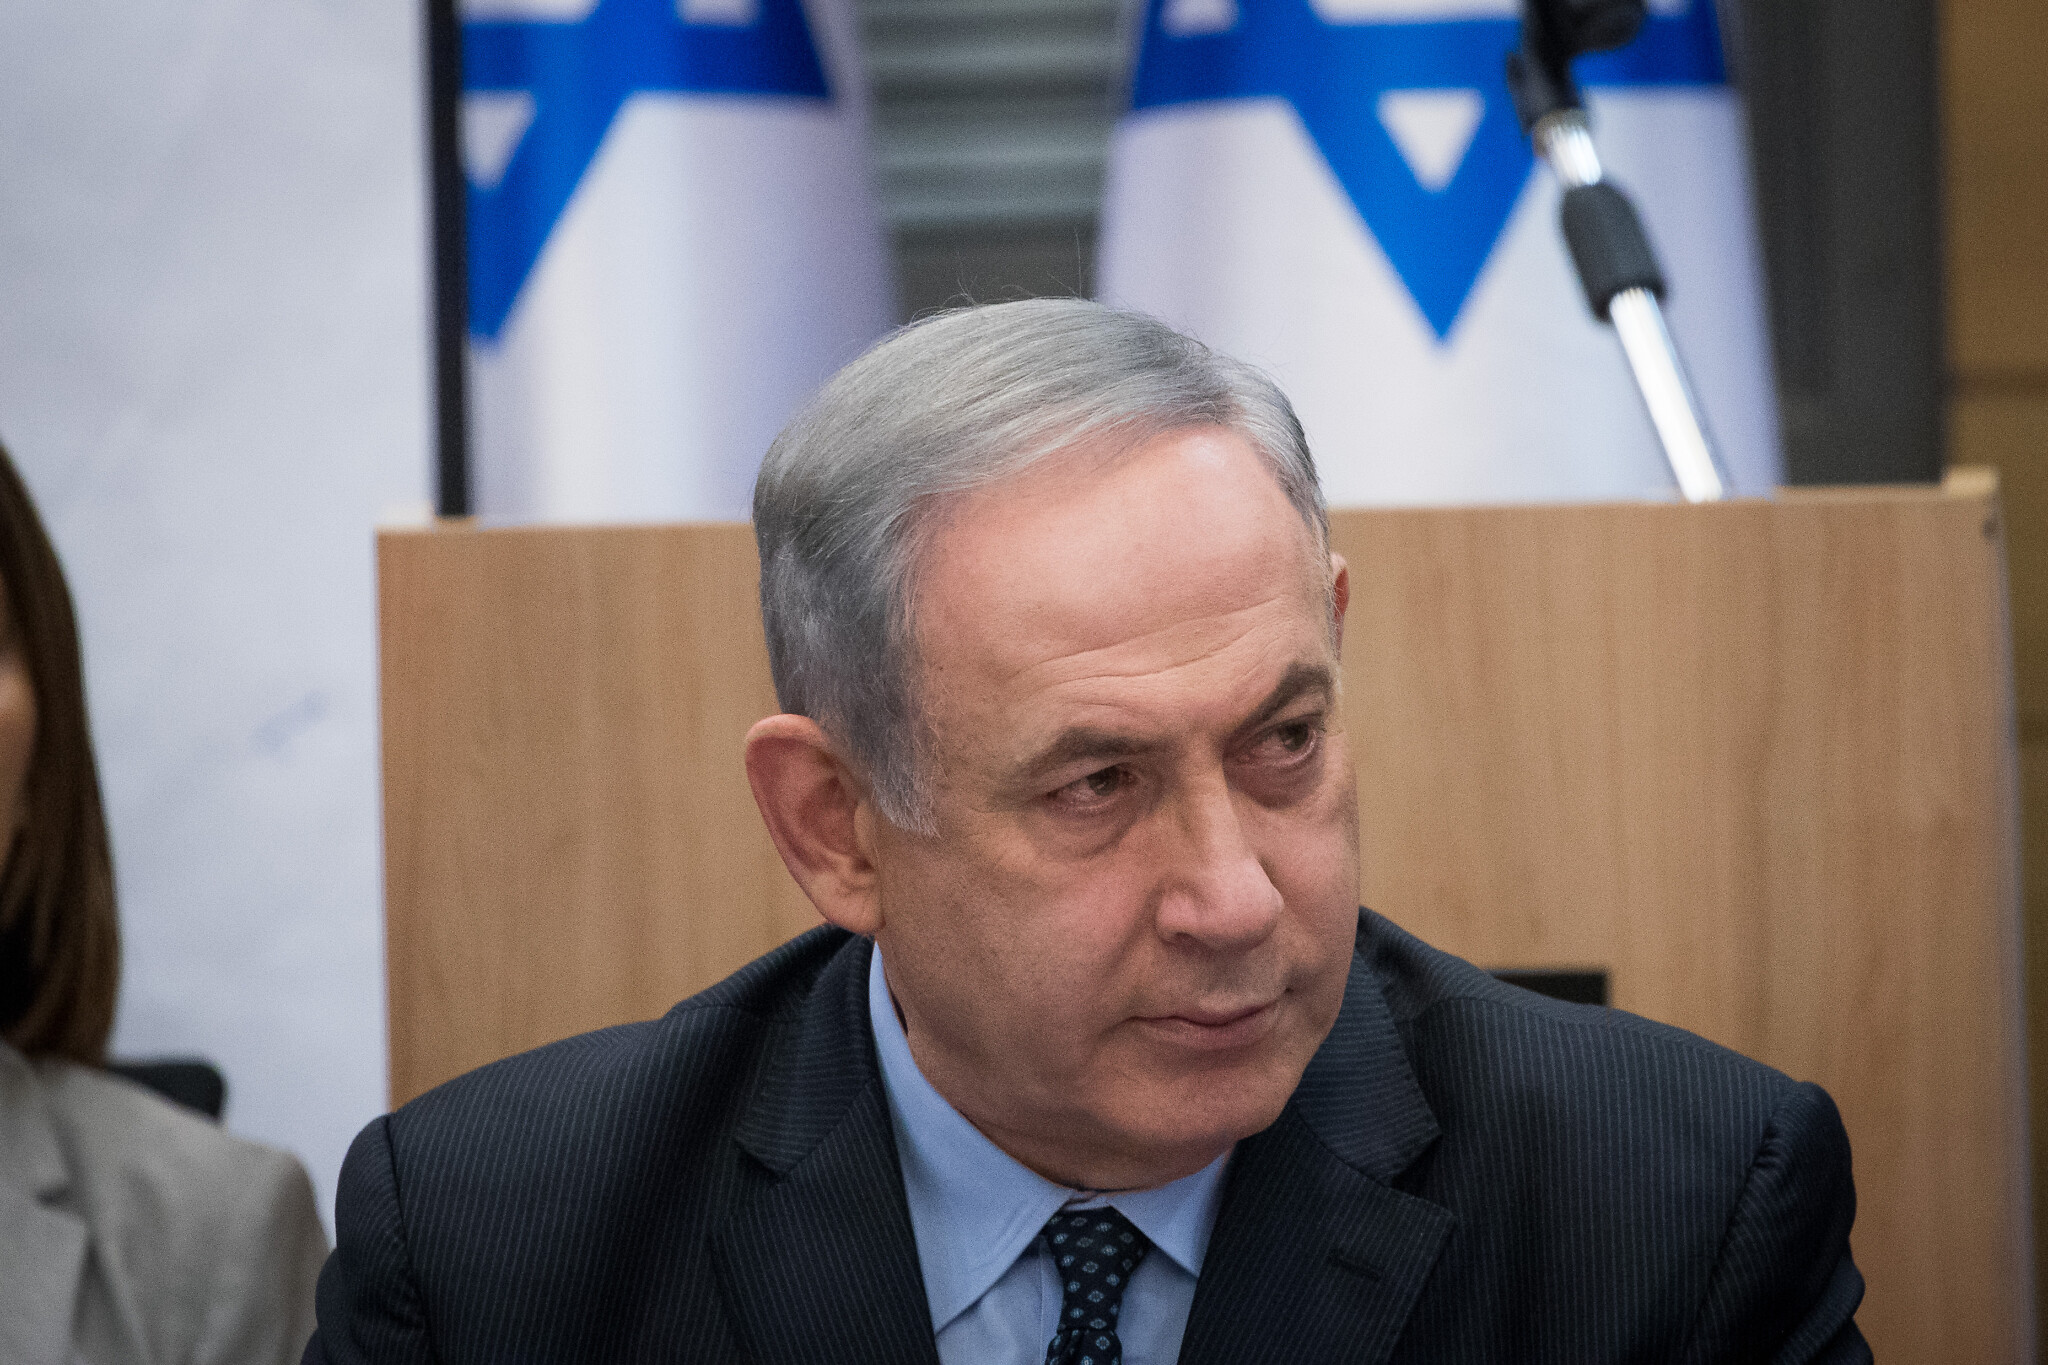 netanyahu formally requests delay of his corruption trial for 45 days | the times of israel